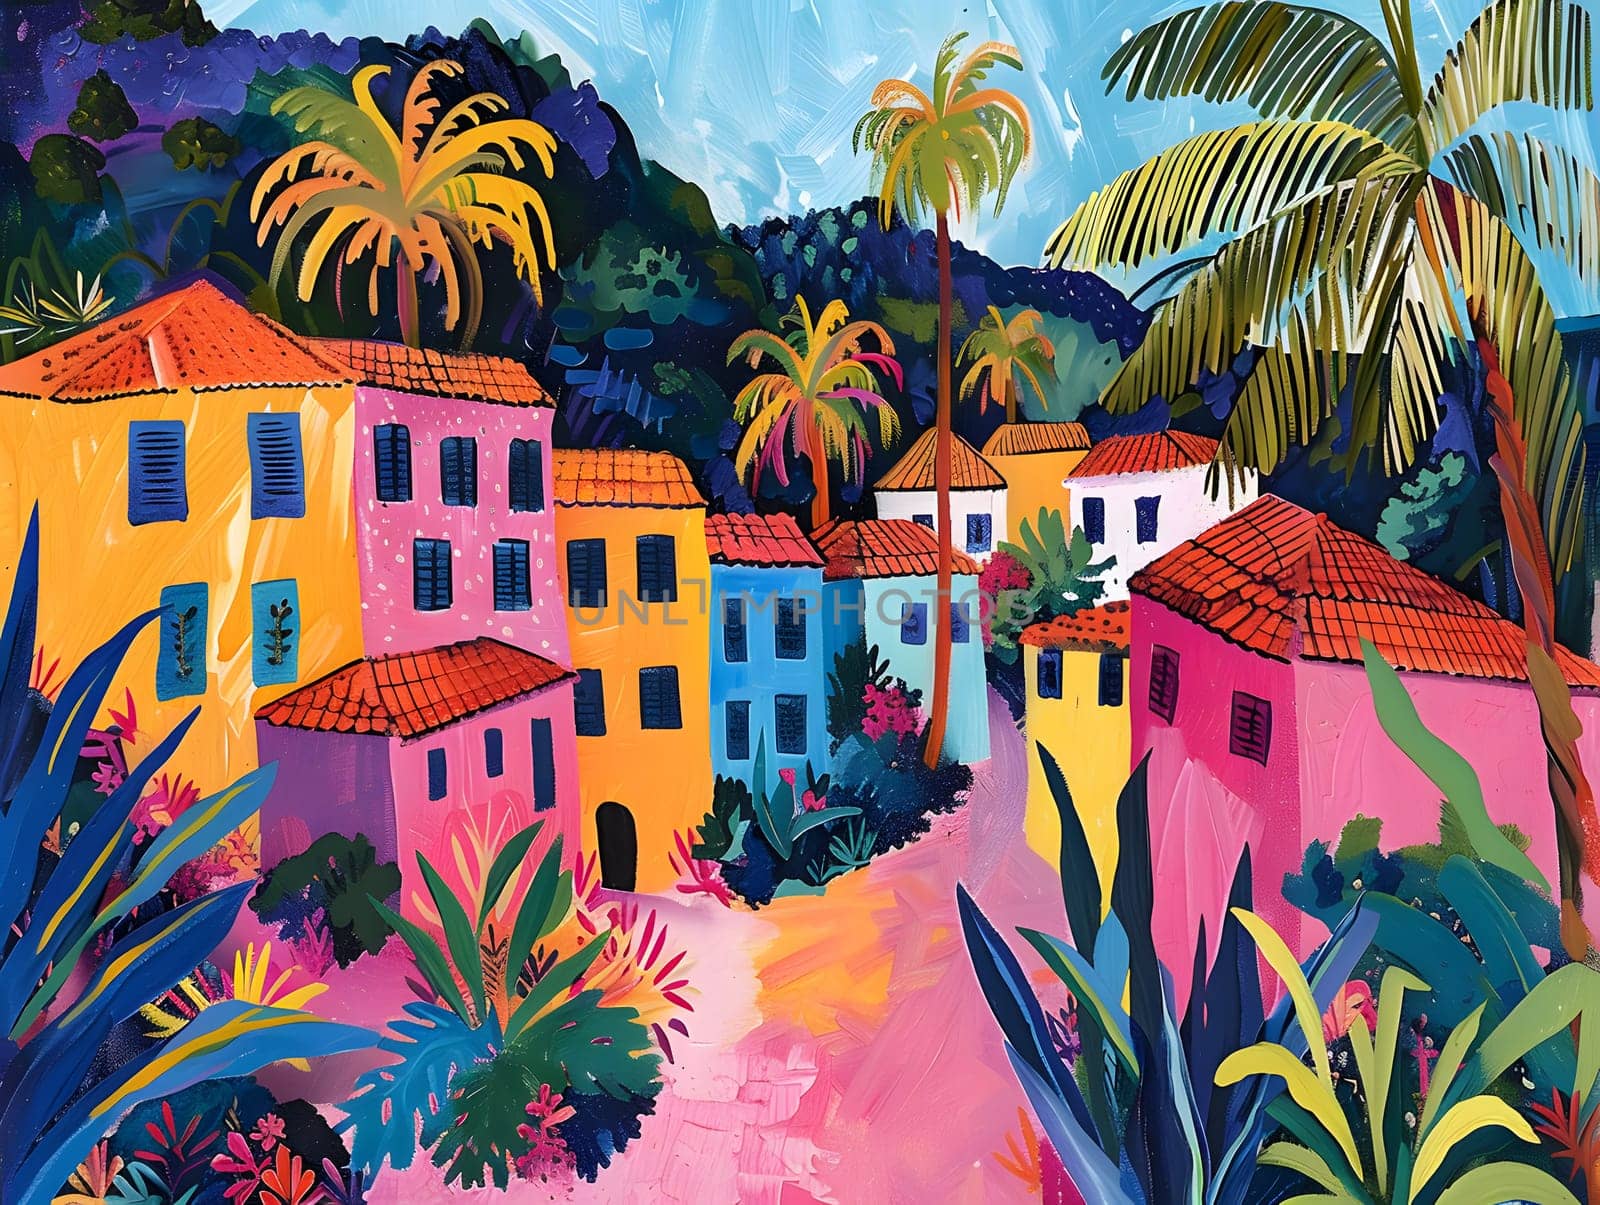 An art painting depicting a tropical village with vibrant houses and lush vegetation, including palm trees. The azure sky and colorful buildings create a serene and picturesque scene